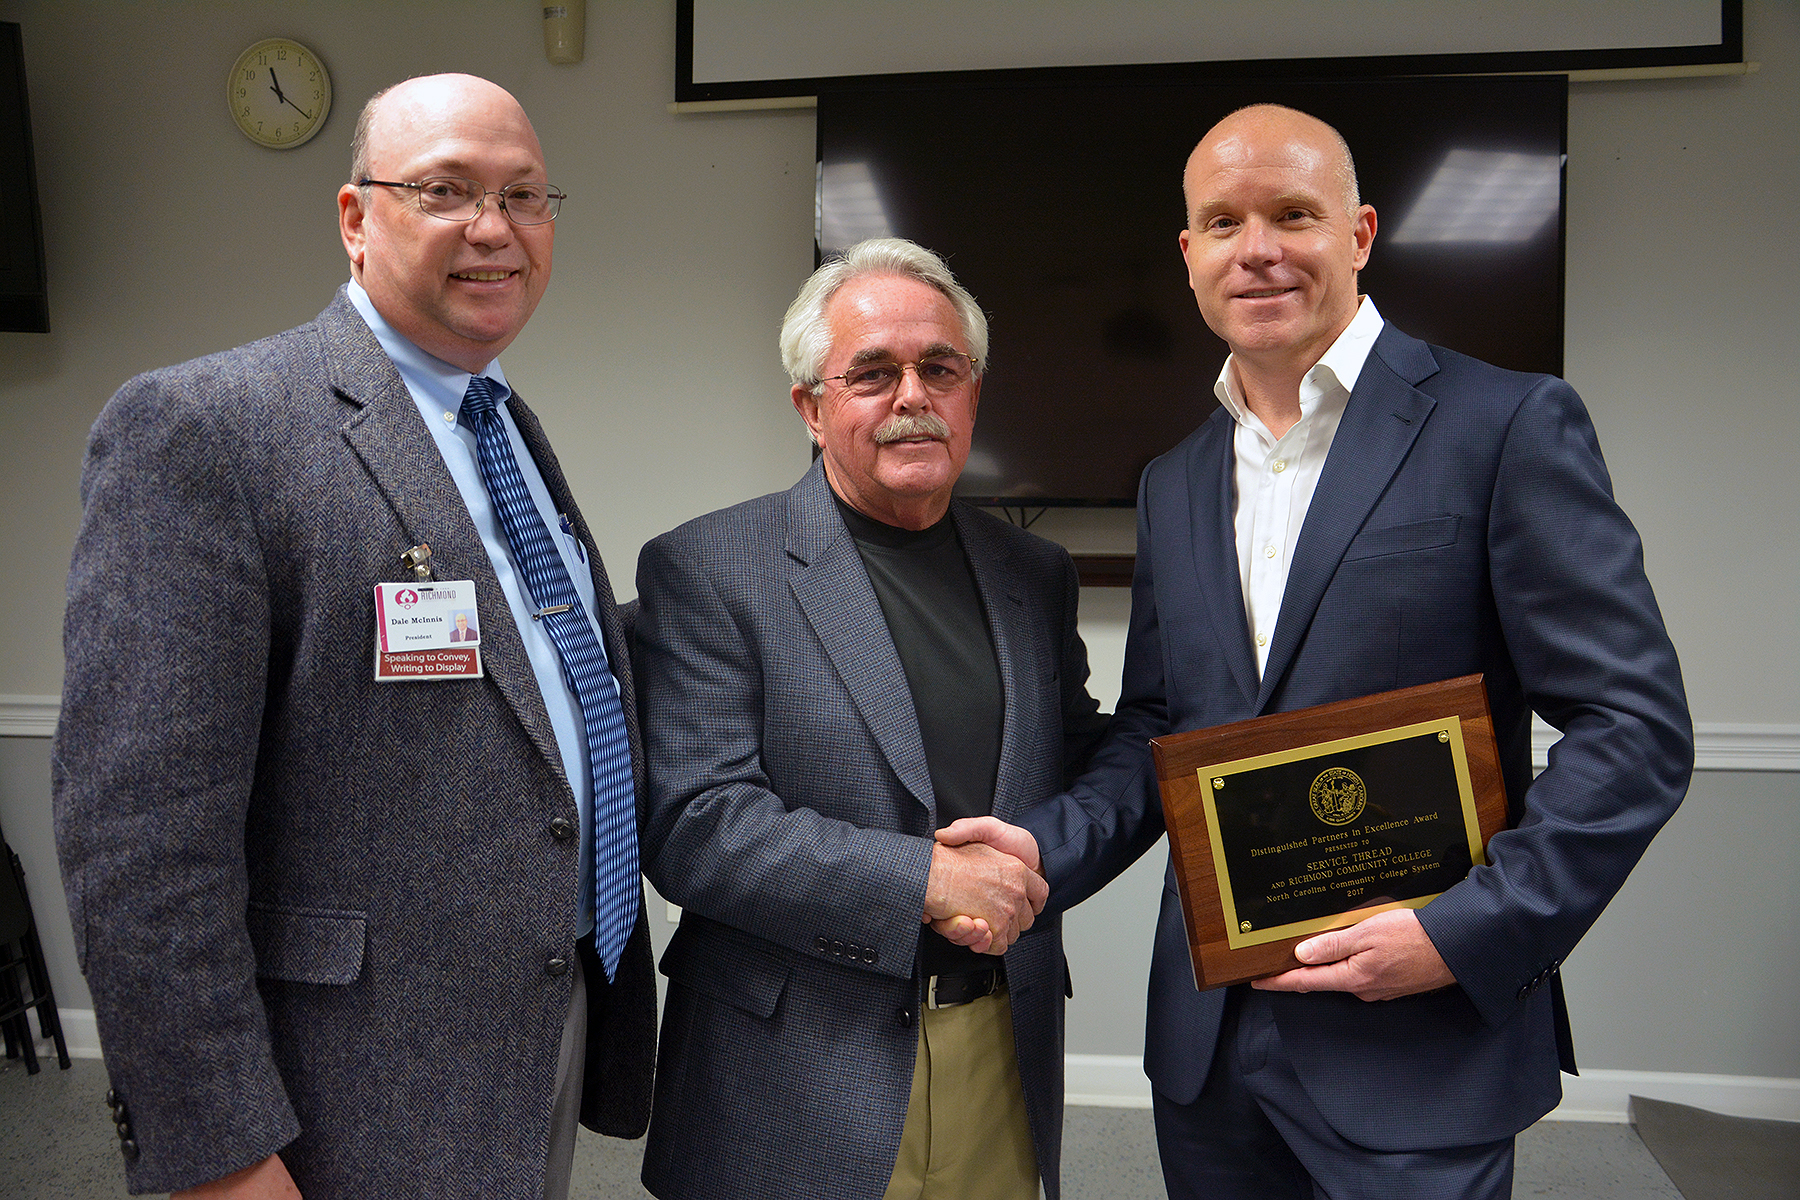 Pictured, from left to right, are Dr. Dale McInnis, president of Richmond Community College, RichmondCC Board of Trustee Dean Nichols, and Service Thread Chief Operating Officer Jay Todd. Service Thread received the Distinguished Partners in Excellence Award from the State Board of Community Colleges.